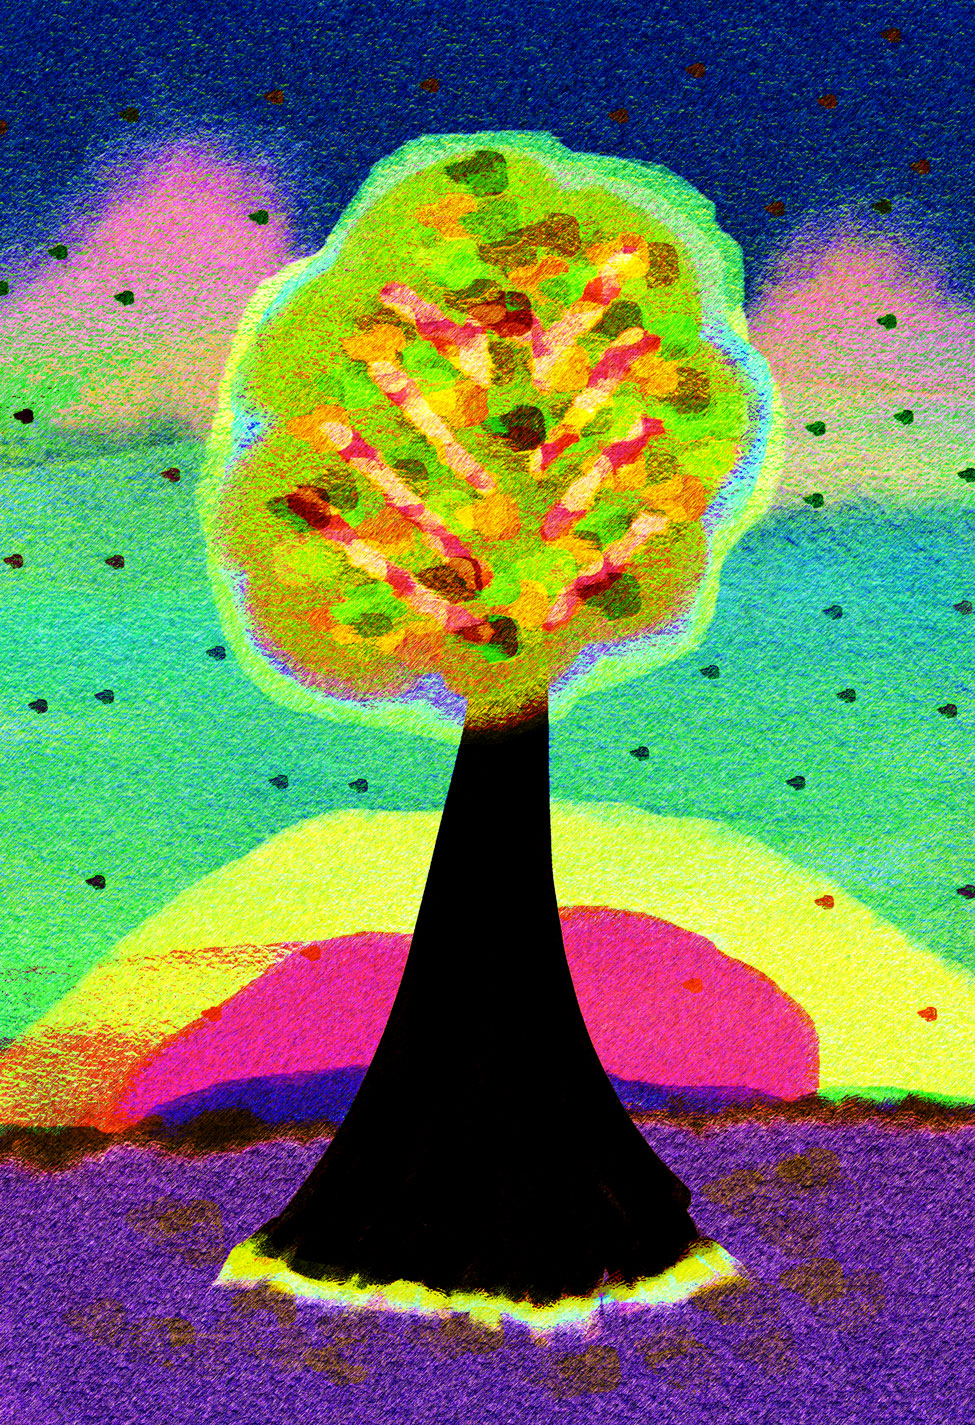 Four drawings of a tree, each showing a different season are overlaid on each other. The image has been heavily stylized in photoshop.